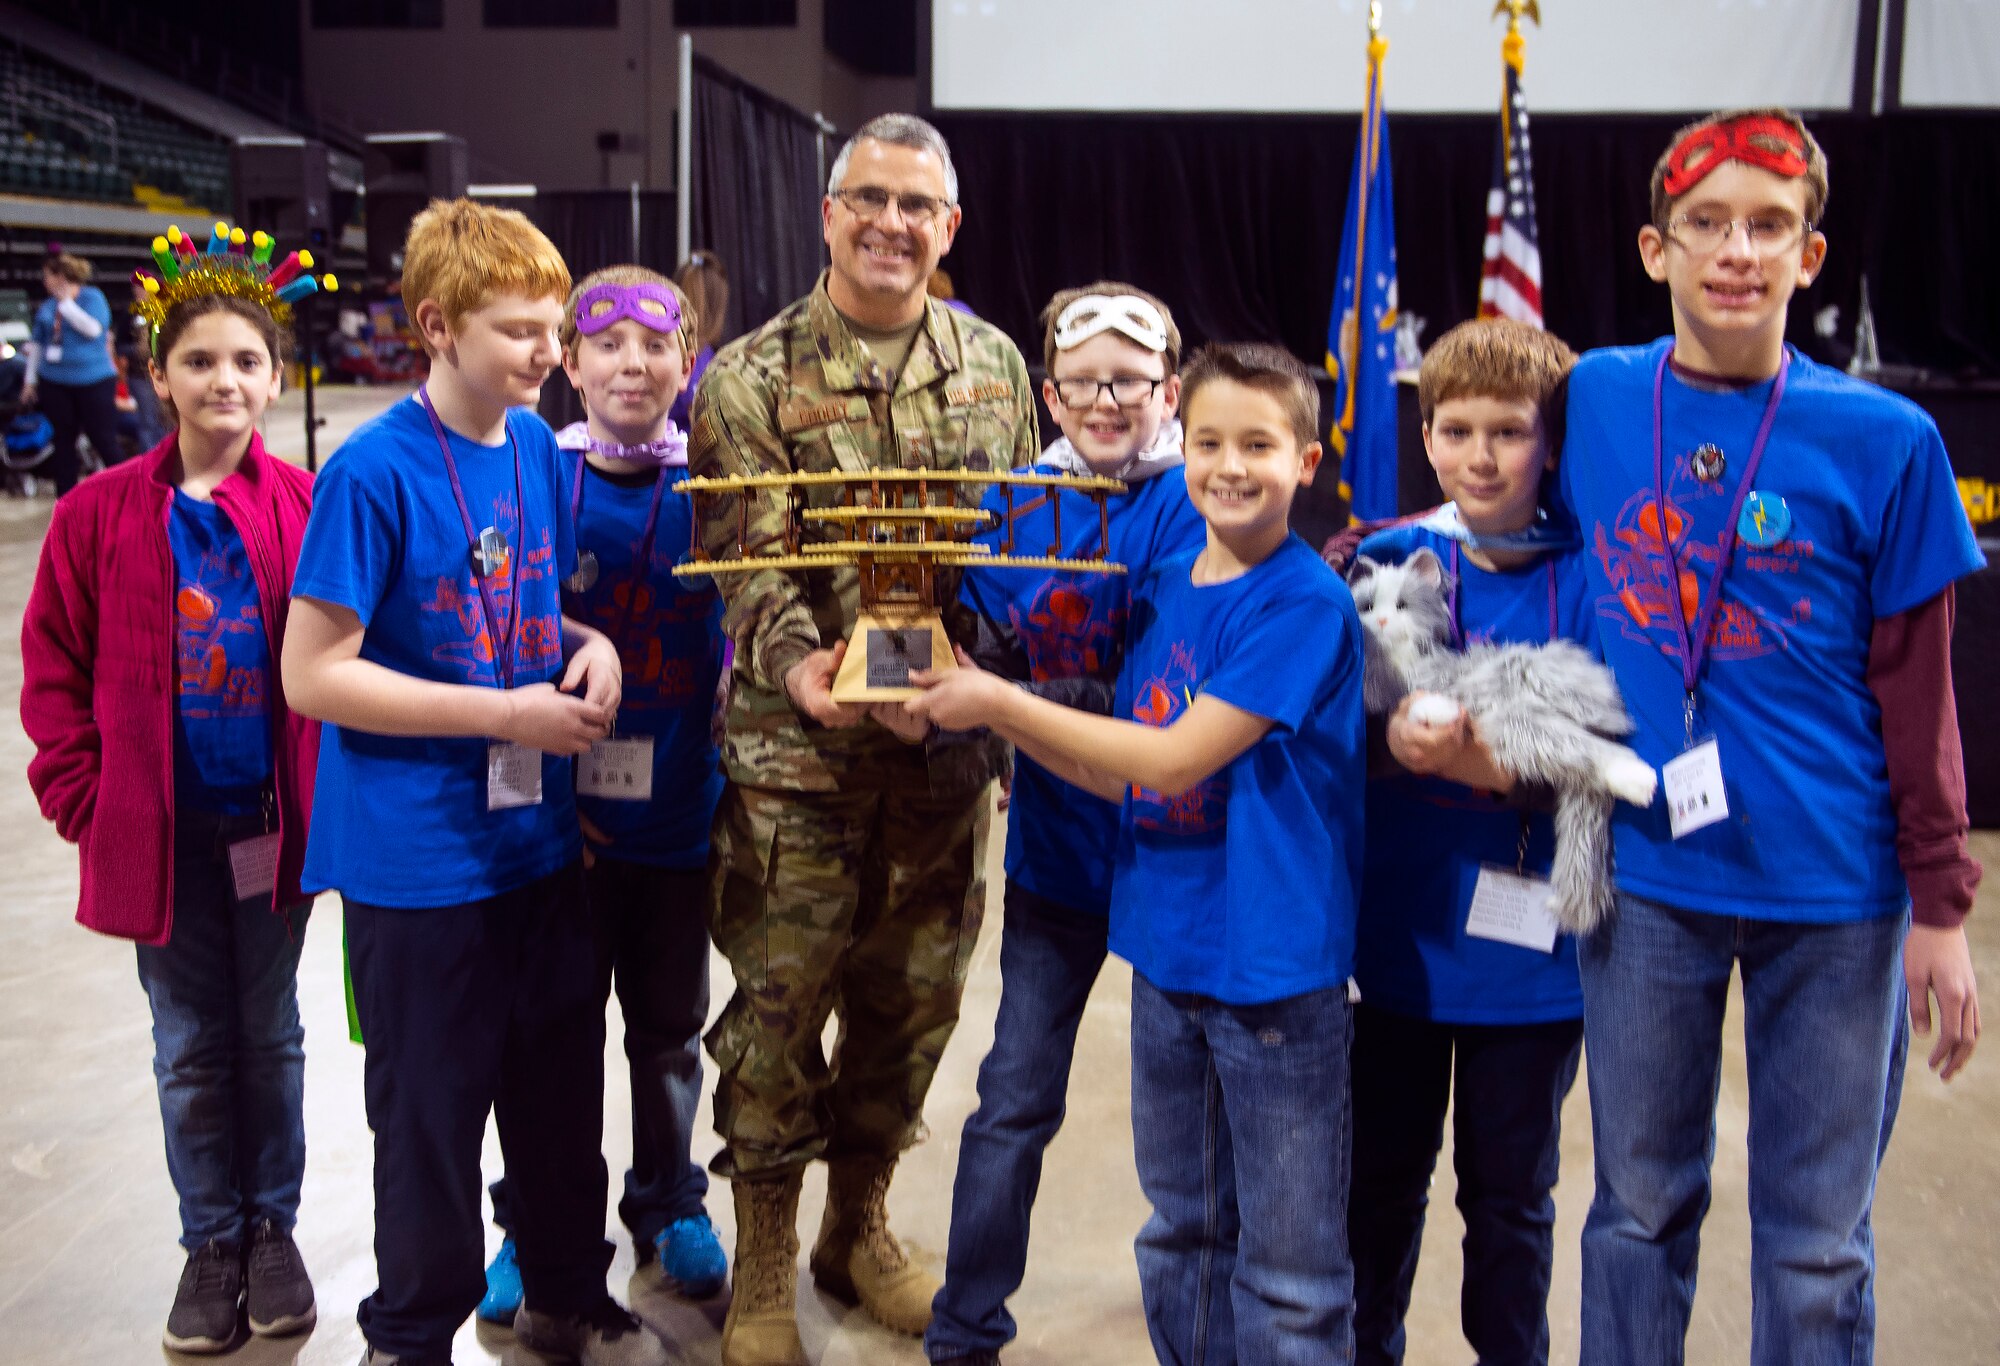 Maj. Gen. William T. Cooley, Air Force Research Laboratory commander, presents the Wright-Patterson Air Force Base Founder’s Award to the LV Super Bots at the FIRST LEGO League Tournament in the Wright State University Nutter Center Feb. 3.